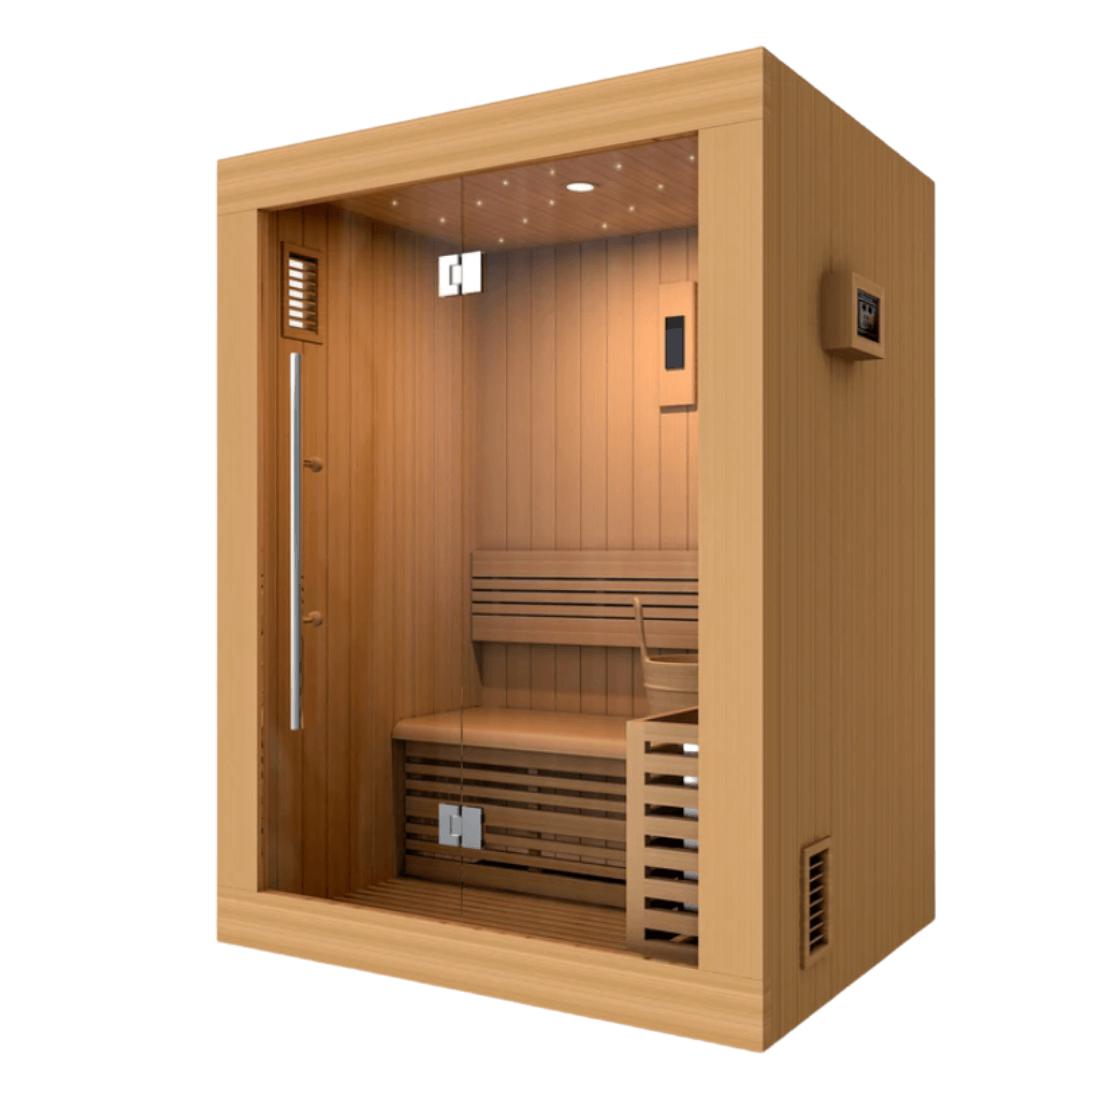 Golden Designs "Sundsvall Edition" 2-Person Traditional Steam Sauna - Canadian Red Cedar, GDI-7289-01 front angle view